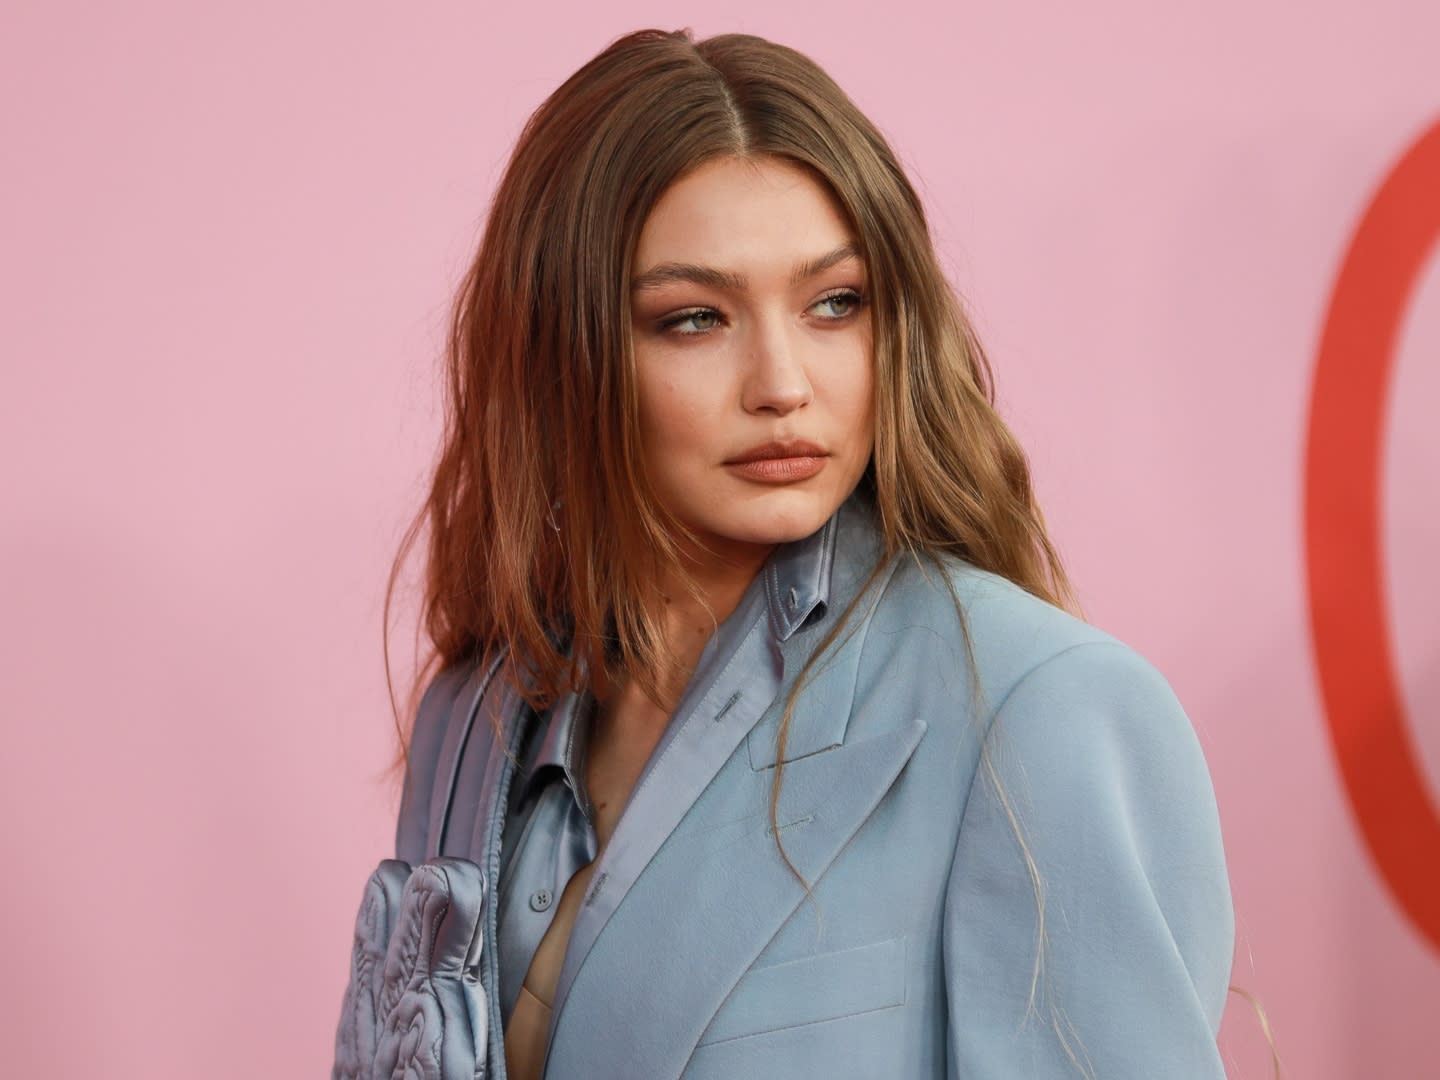 Get Gigi Hadid's Style in Your Baby's Nursery: Here's What You Can Buy Now